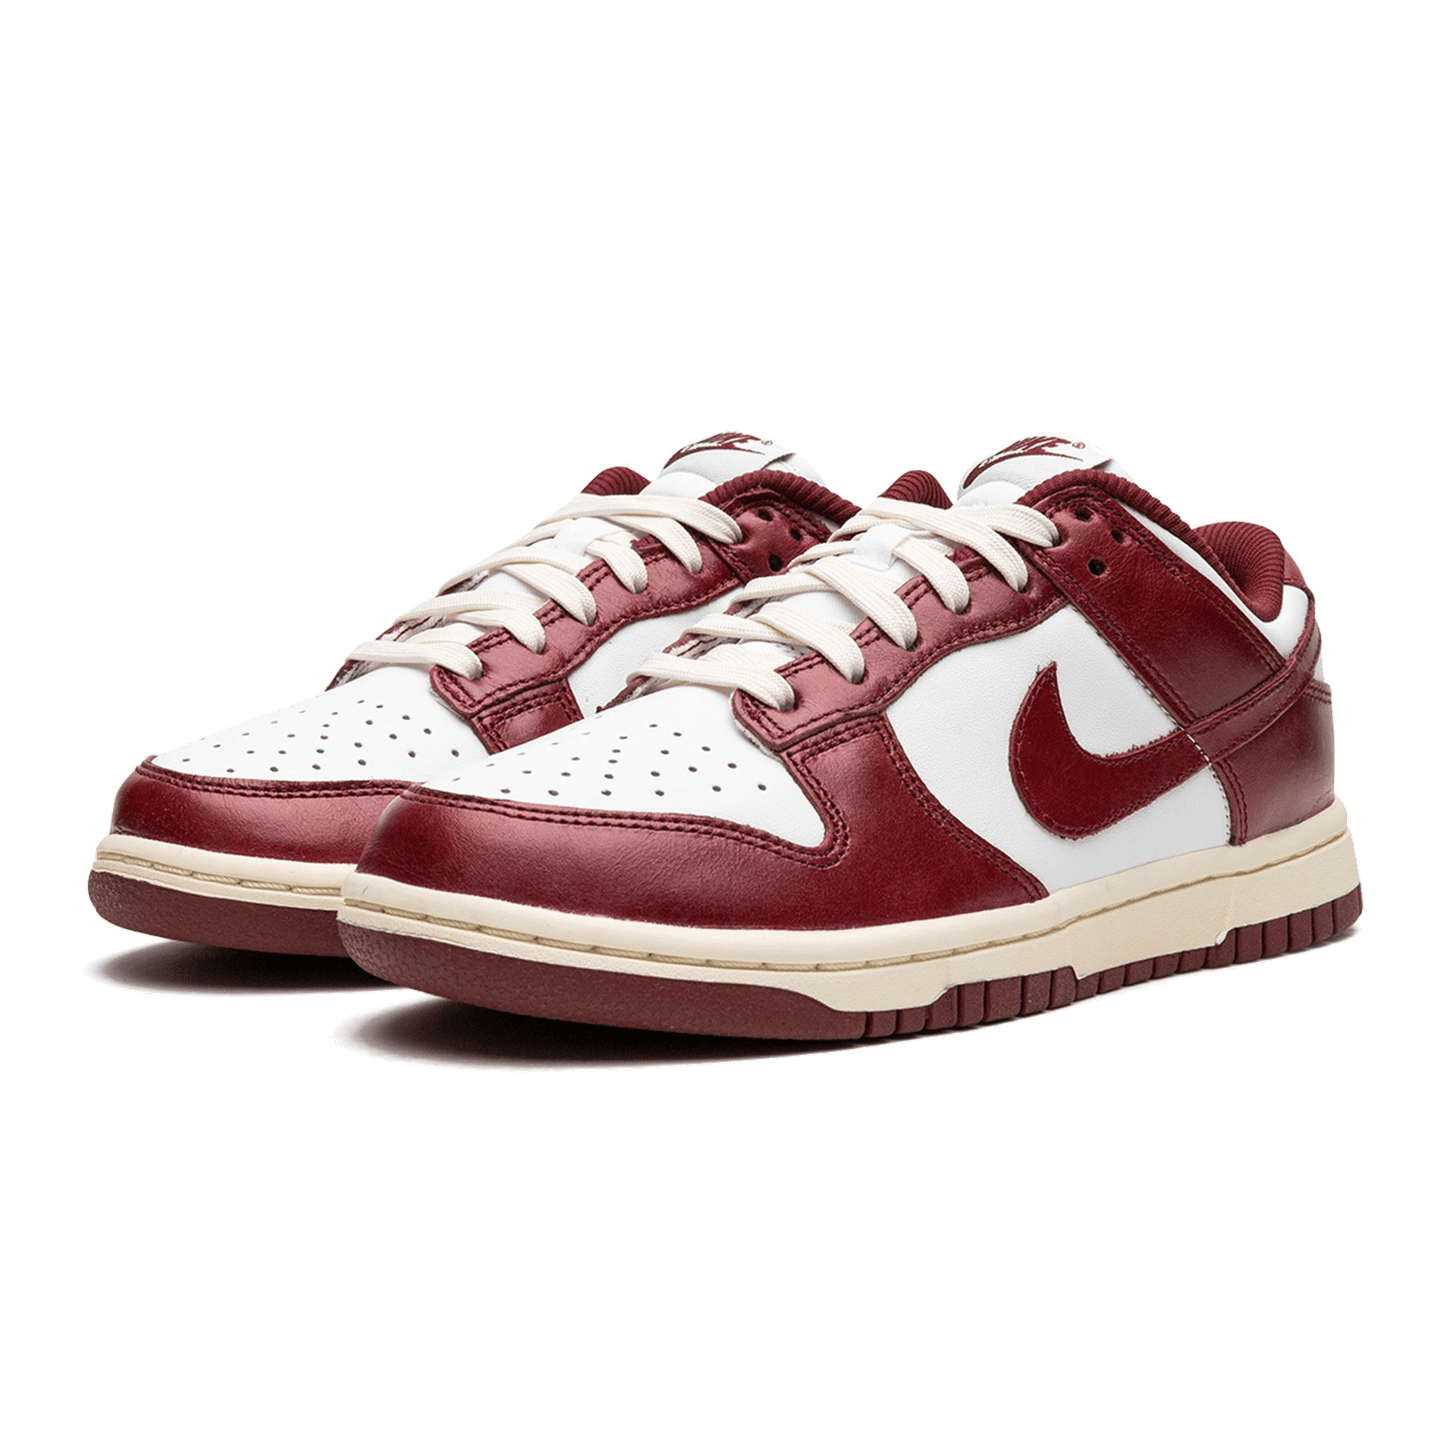 Nike Dunk Low PRM Team Red sneakers